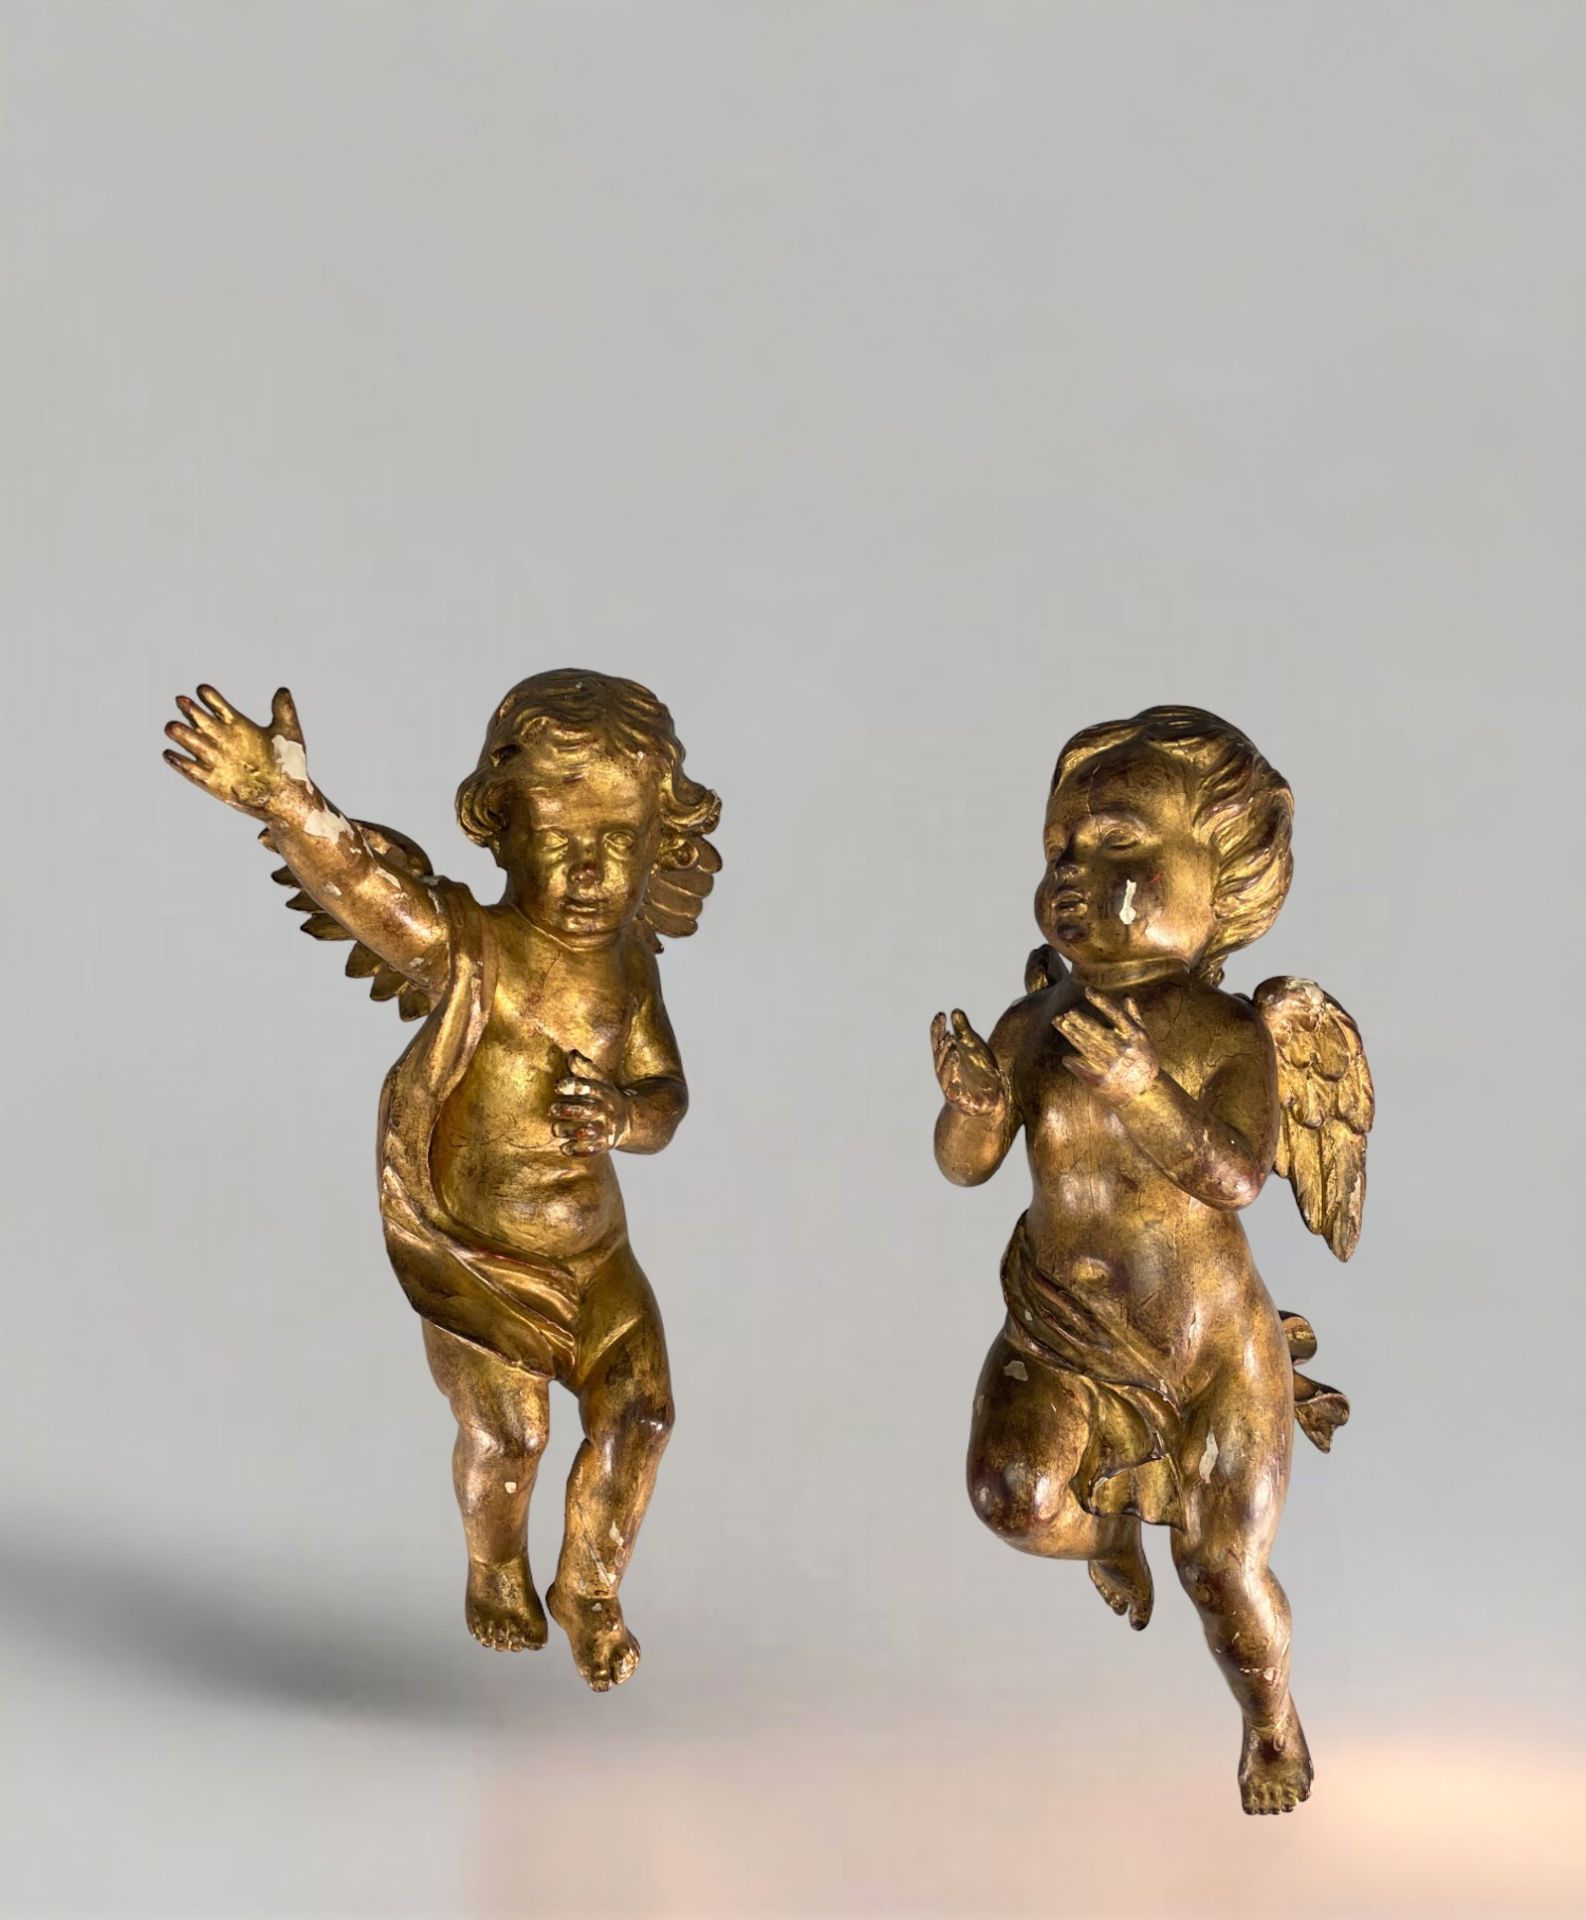 Pair of 18th century carved and gilded wooden angels - Image 5 of 5